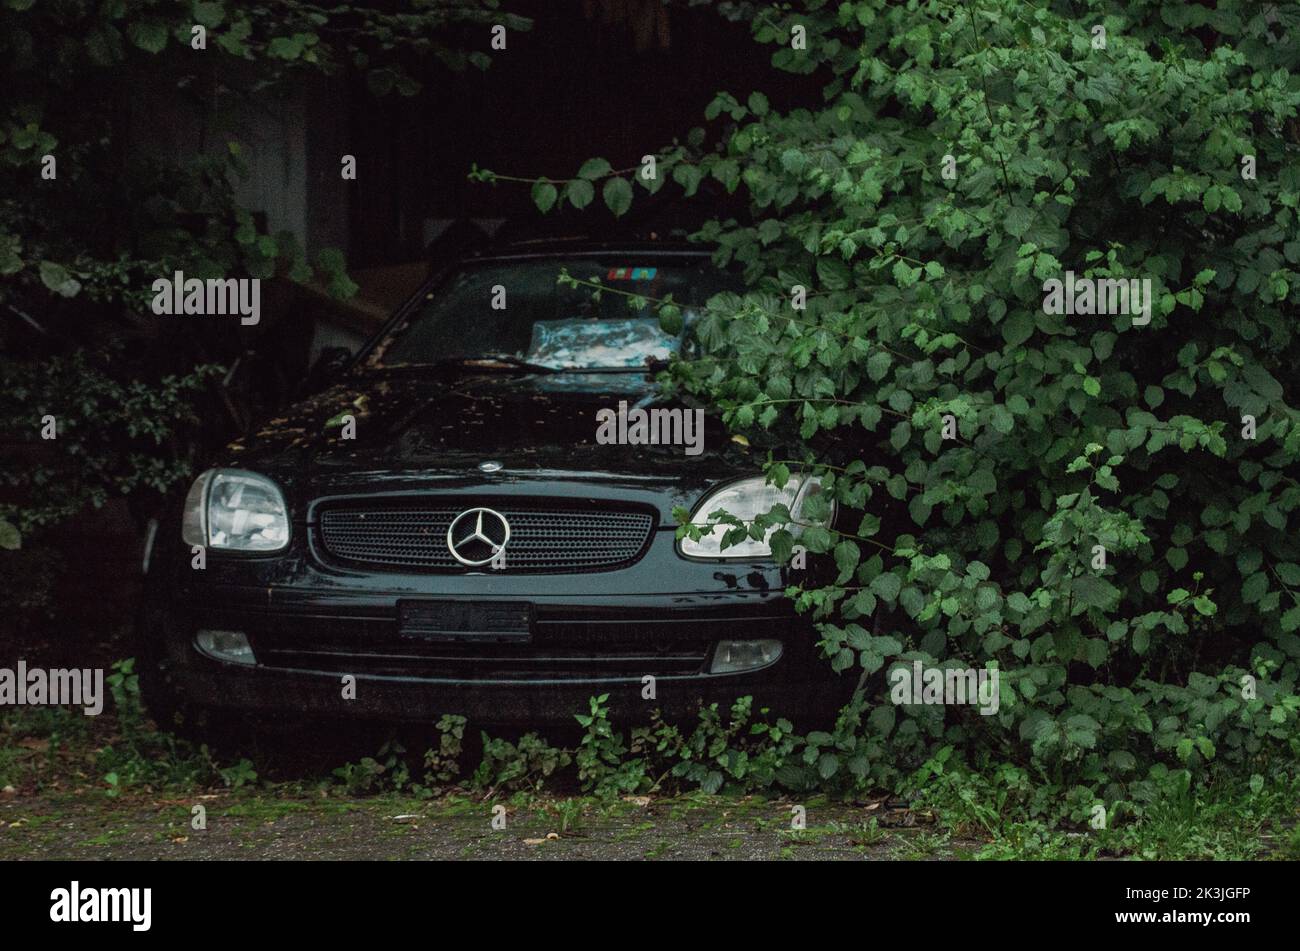 An abandoned Car (Mercedes Benz) left in the bushes to slowly fade away. Worn down car hiding in the bushes and leaves. abandoned car in a bush. Stock Photo